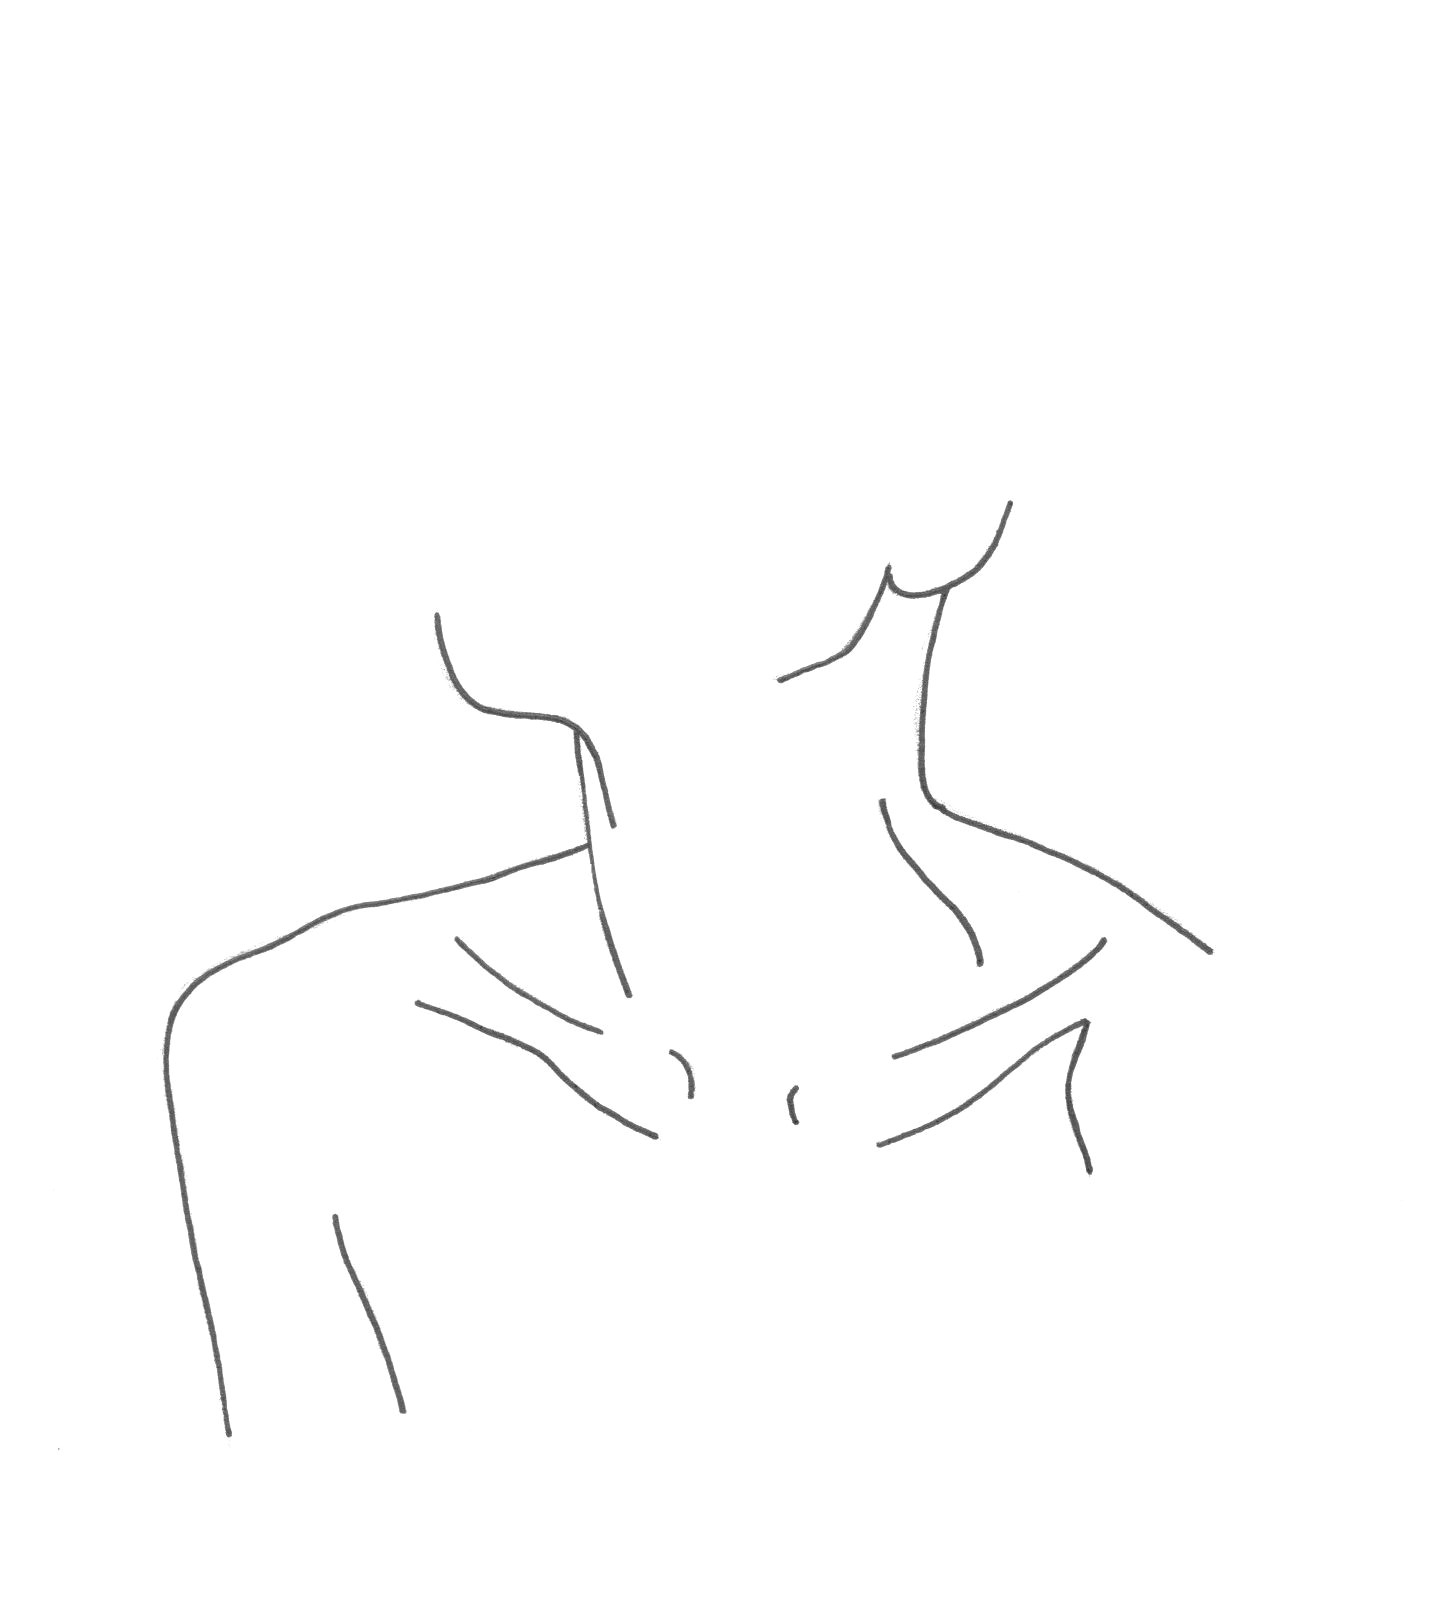 minimal neckline drawing thecolourstudy by thecolourstudy